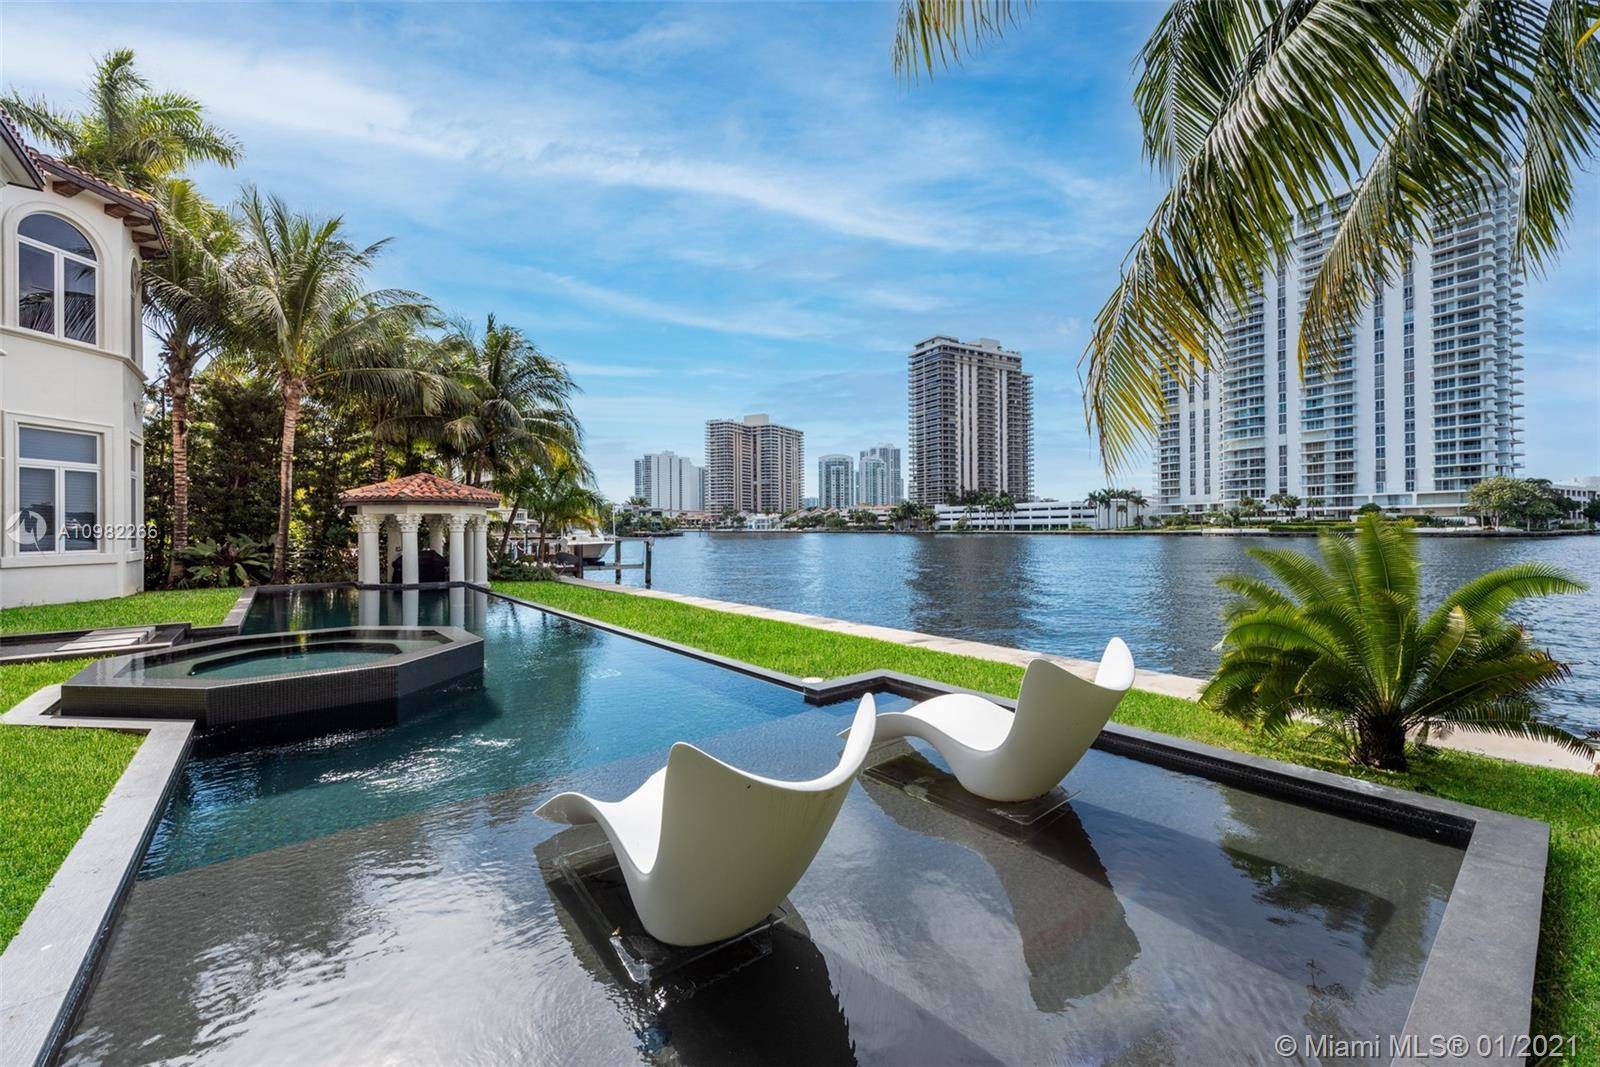 Stunning and impeccably designed waterfront estate by Affiniti Architects with interiors by Steven G, located in one of South Florida s most exclusive gated communities.